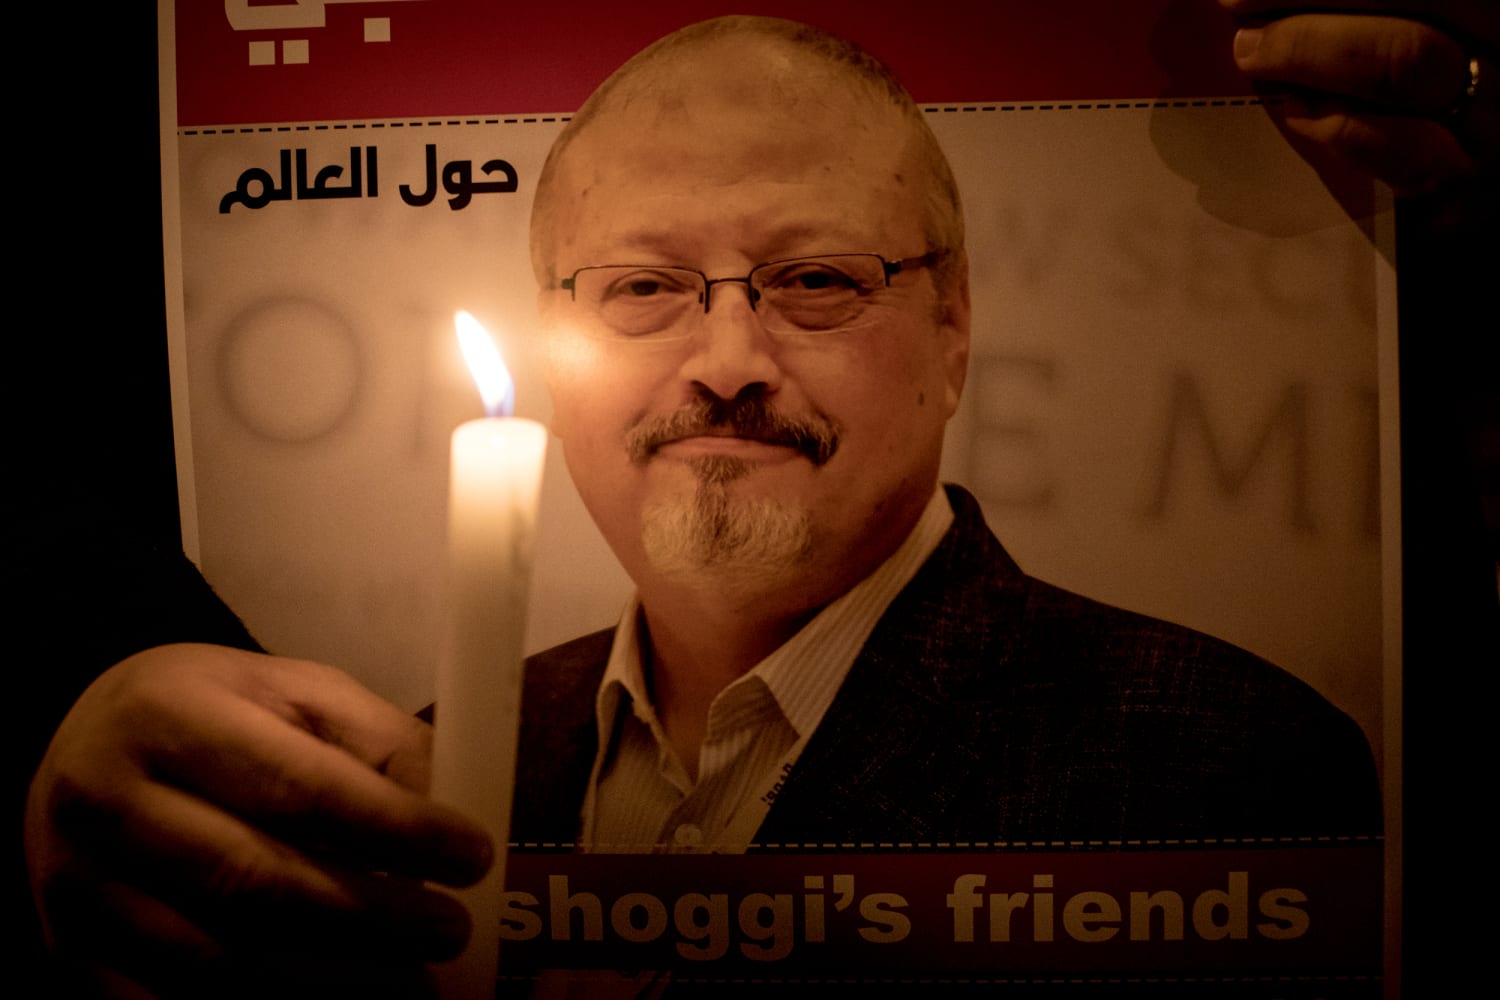 Man detained in Paris in connection with Khashoggi murder released